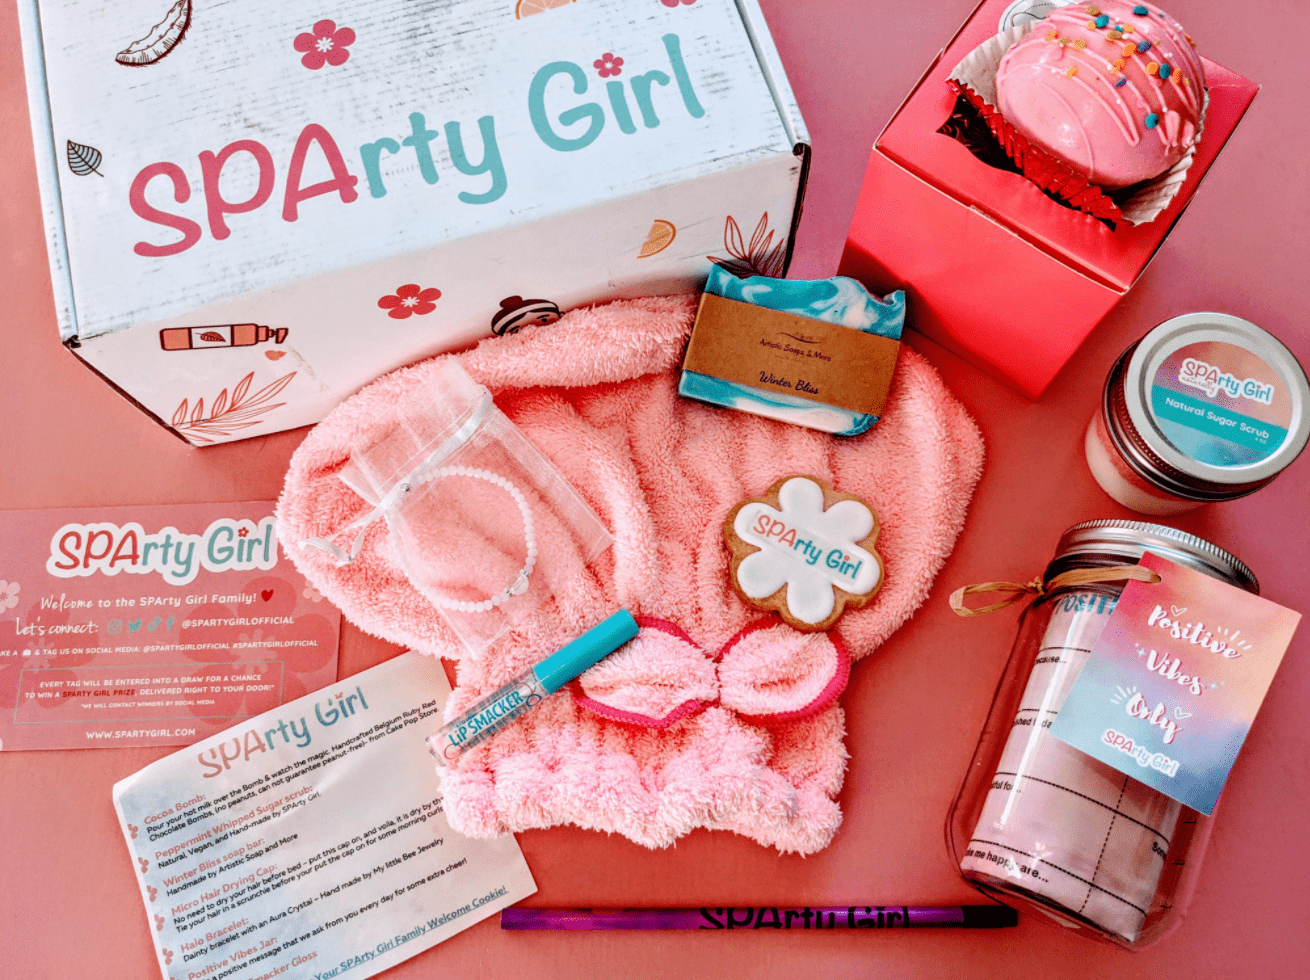 SPArty Girl… Winter 2020/21 Spa Box Review!